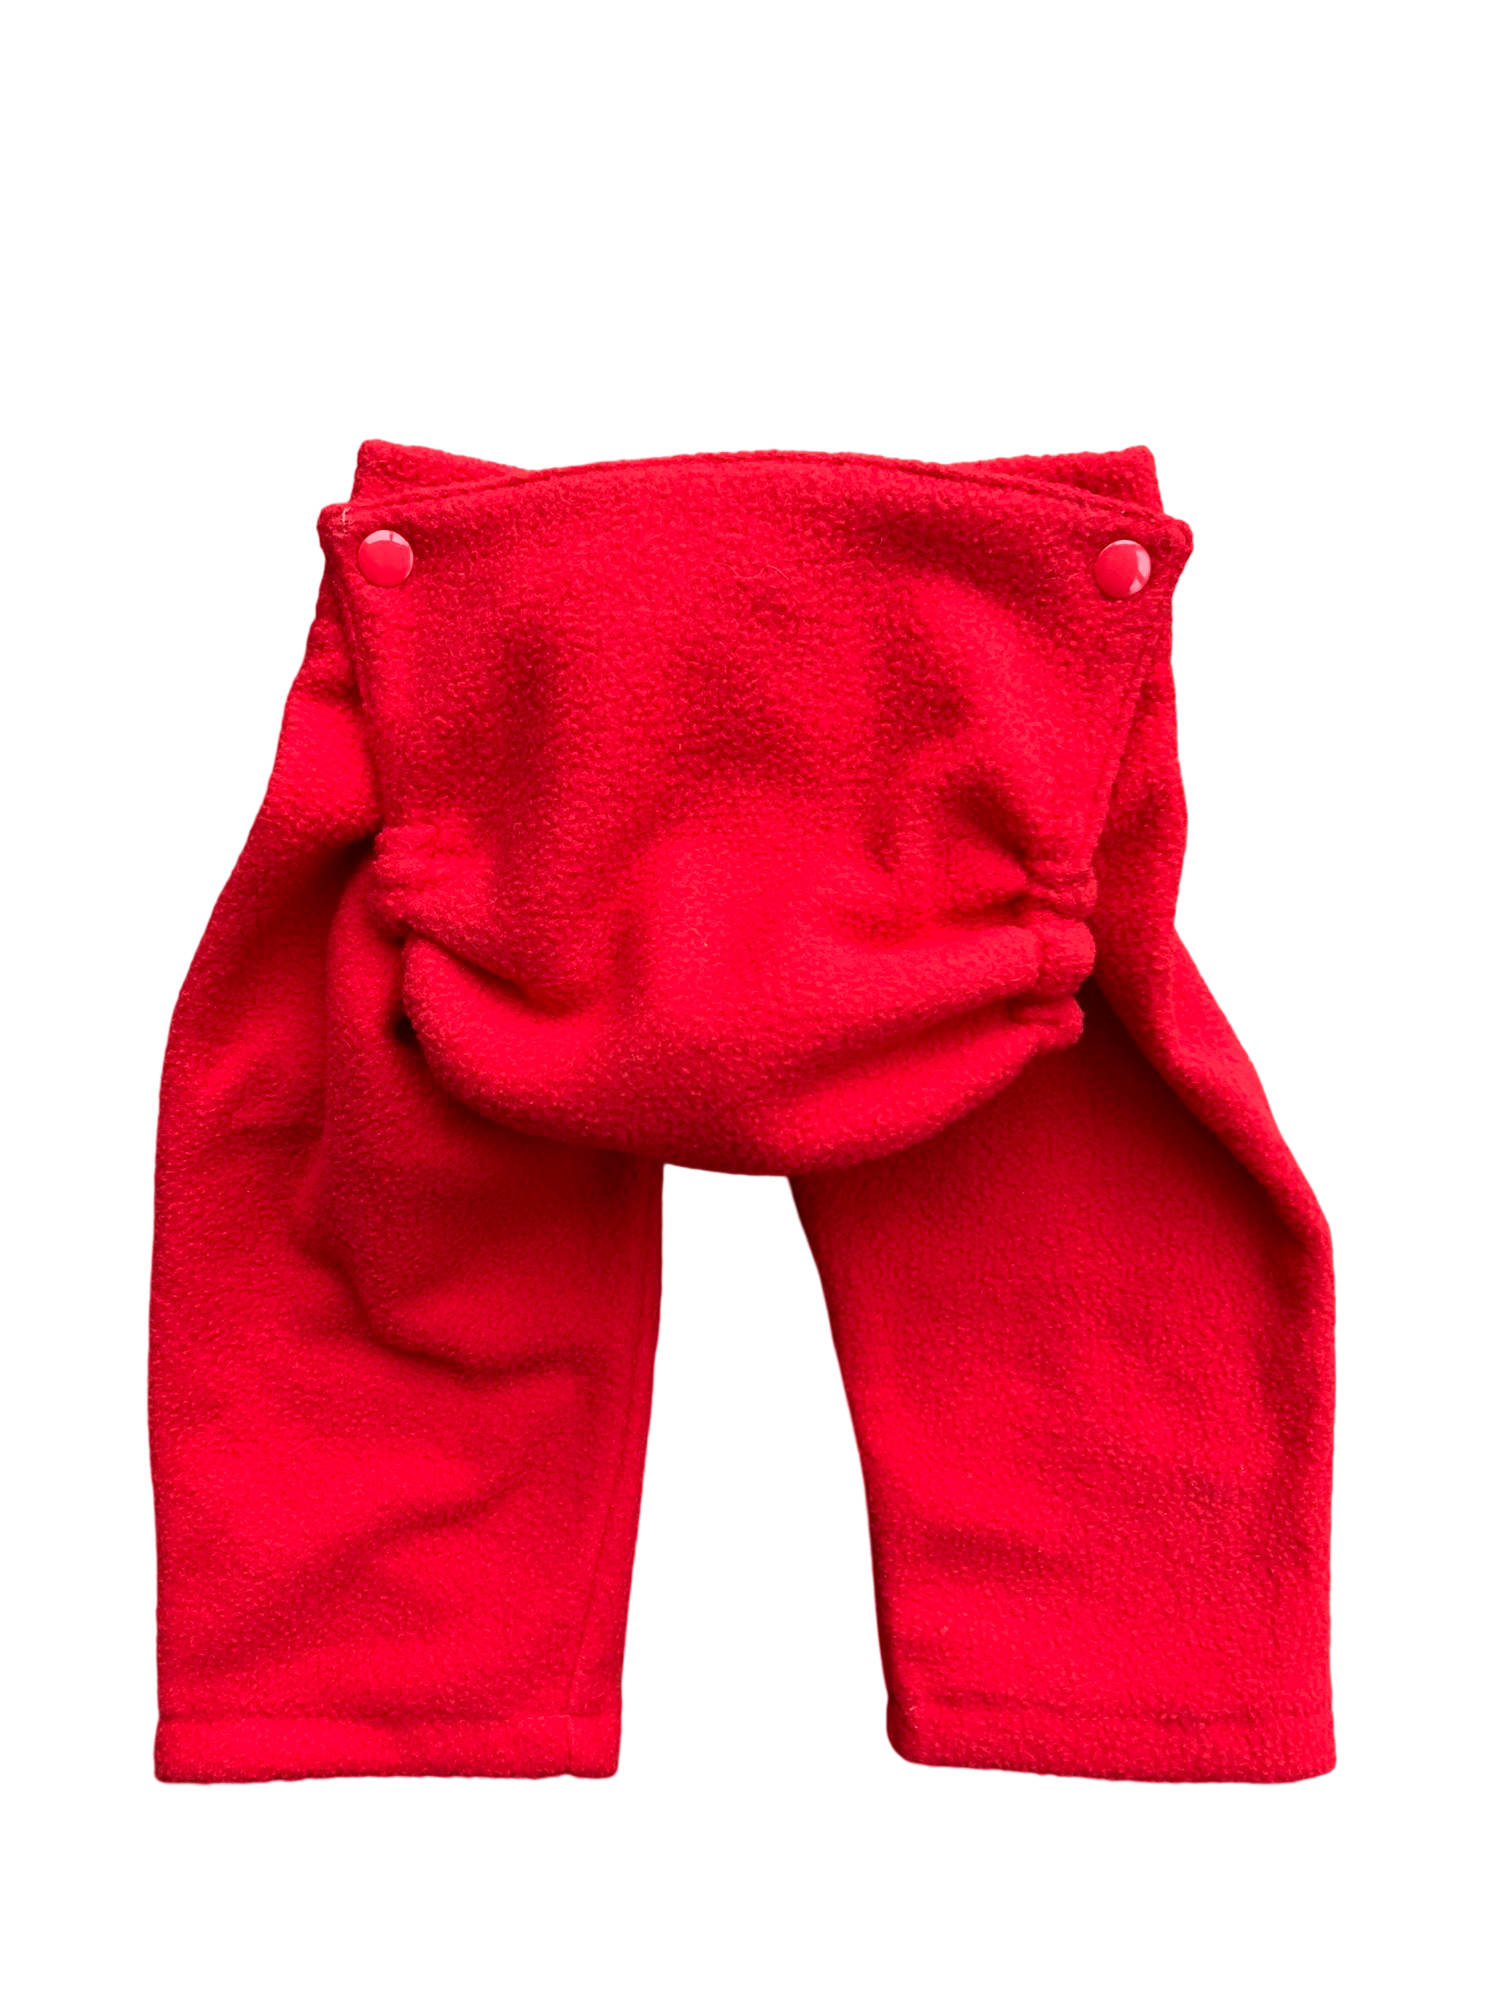 Candy Apple Red Chappy-Couche Pantalon